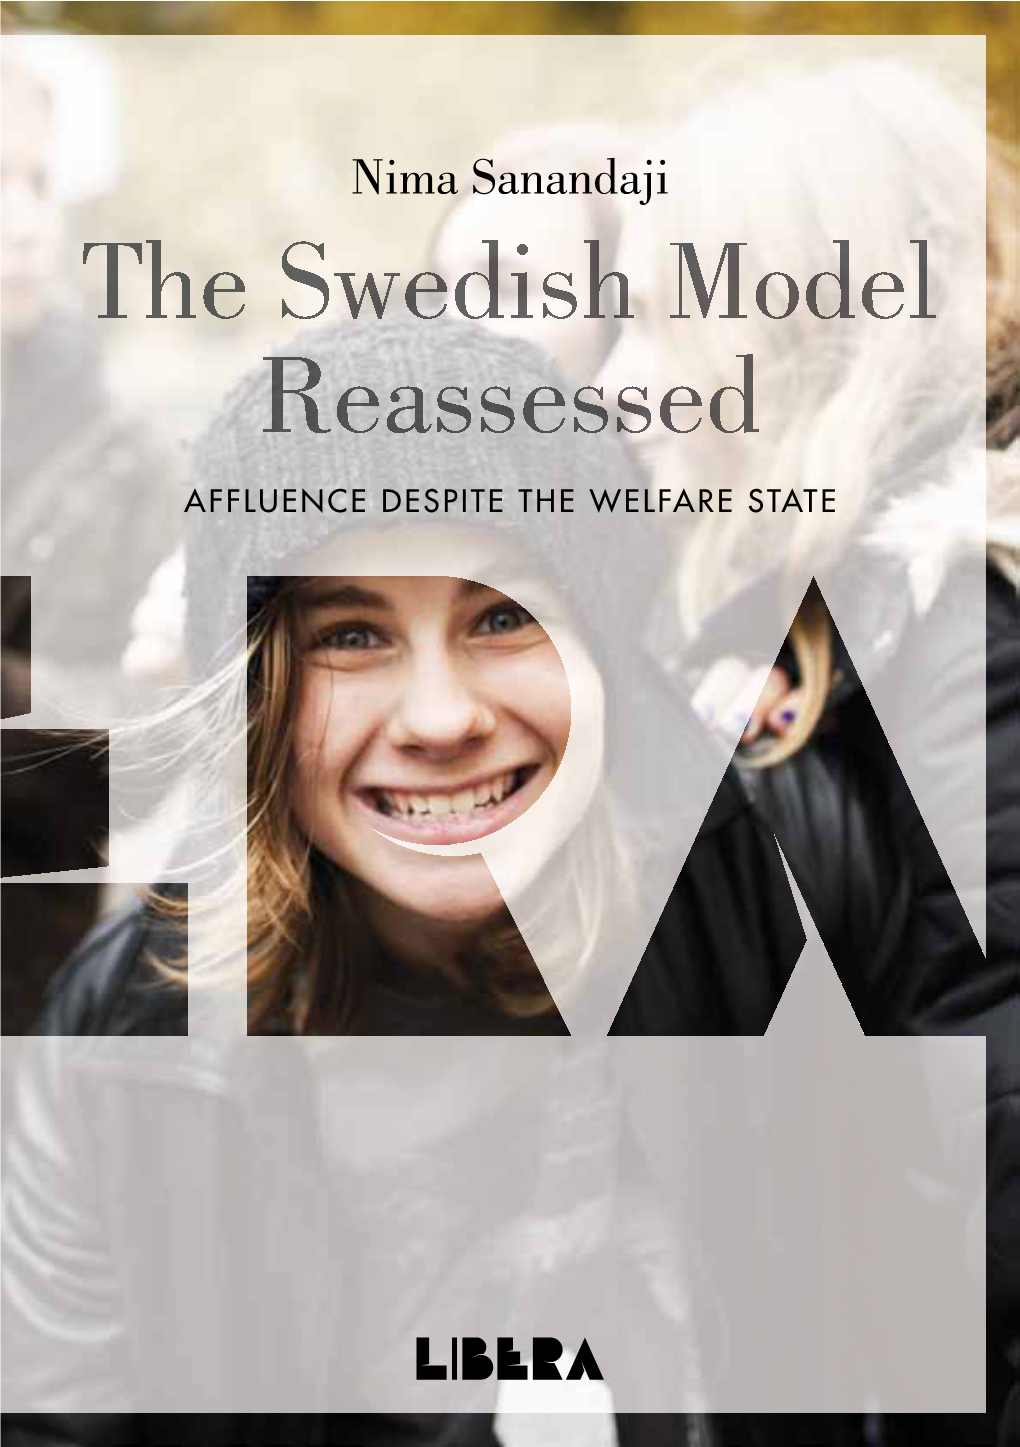 The Swedish Model Reassessed AFFLUENCE DESPITE the WELFARE STATE